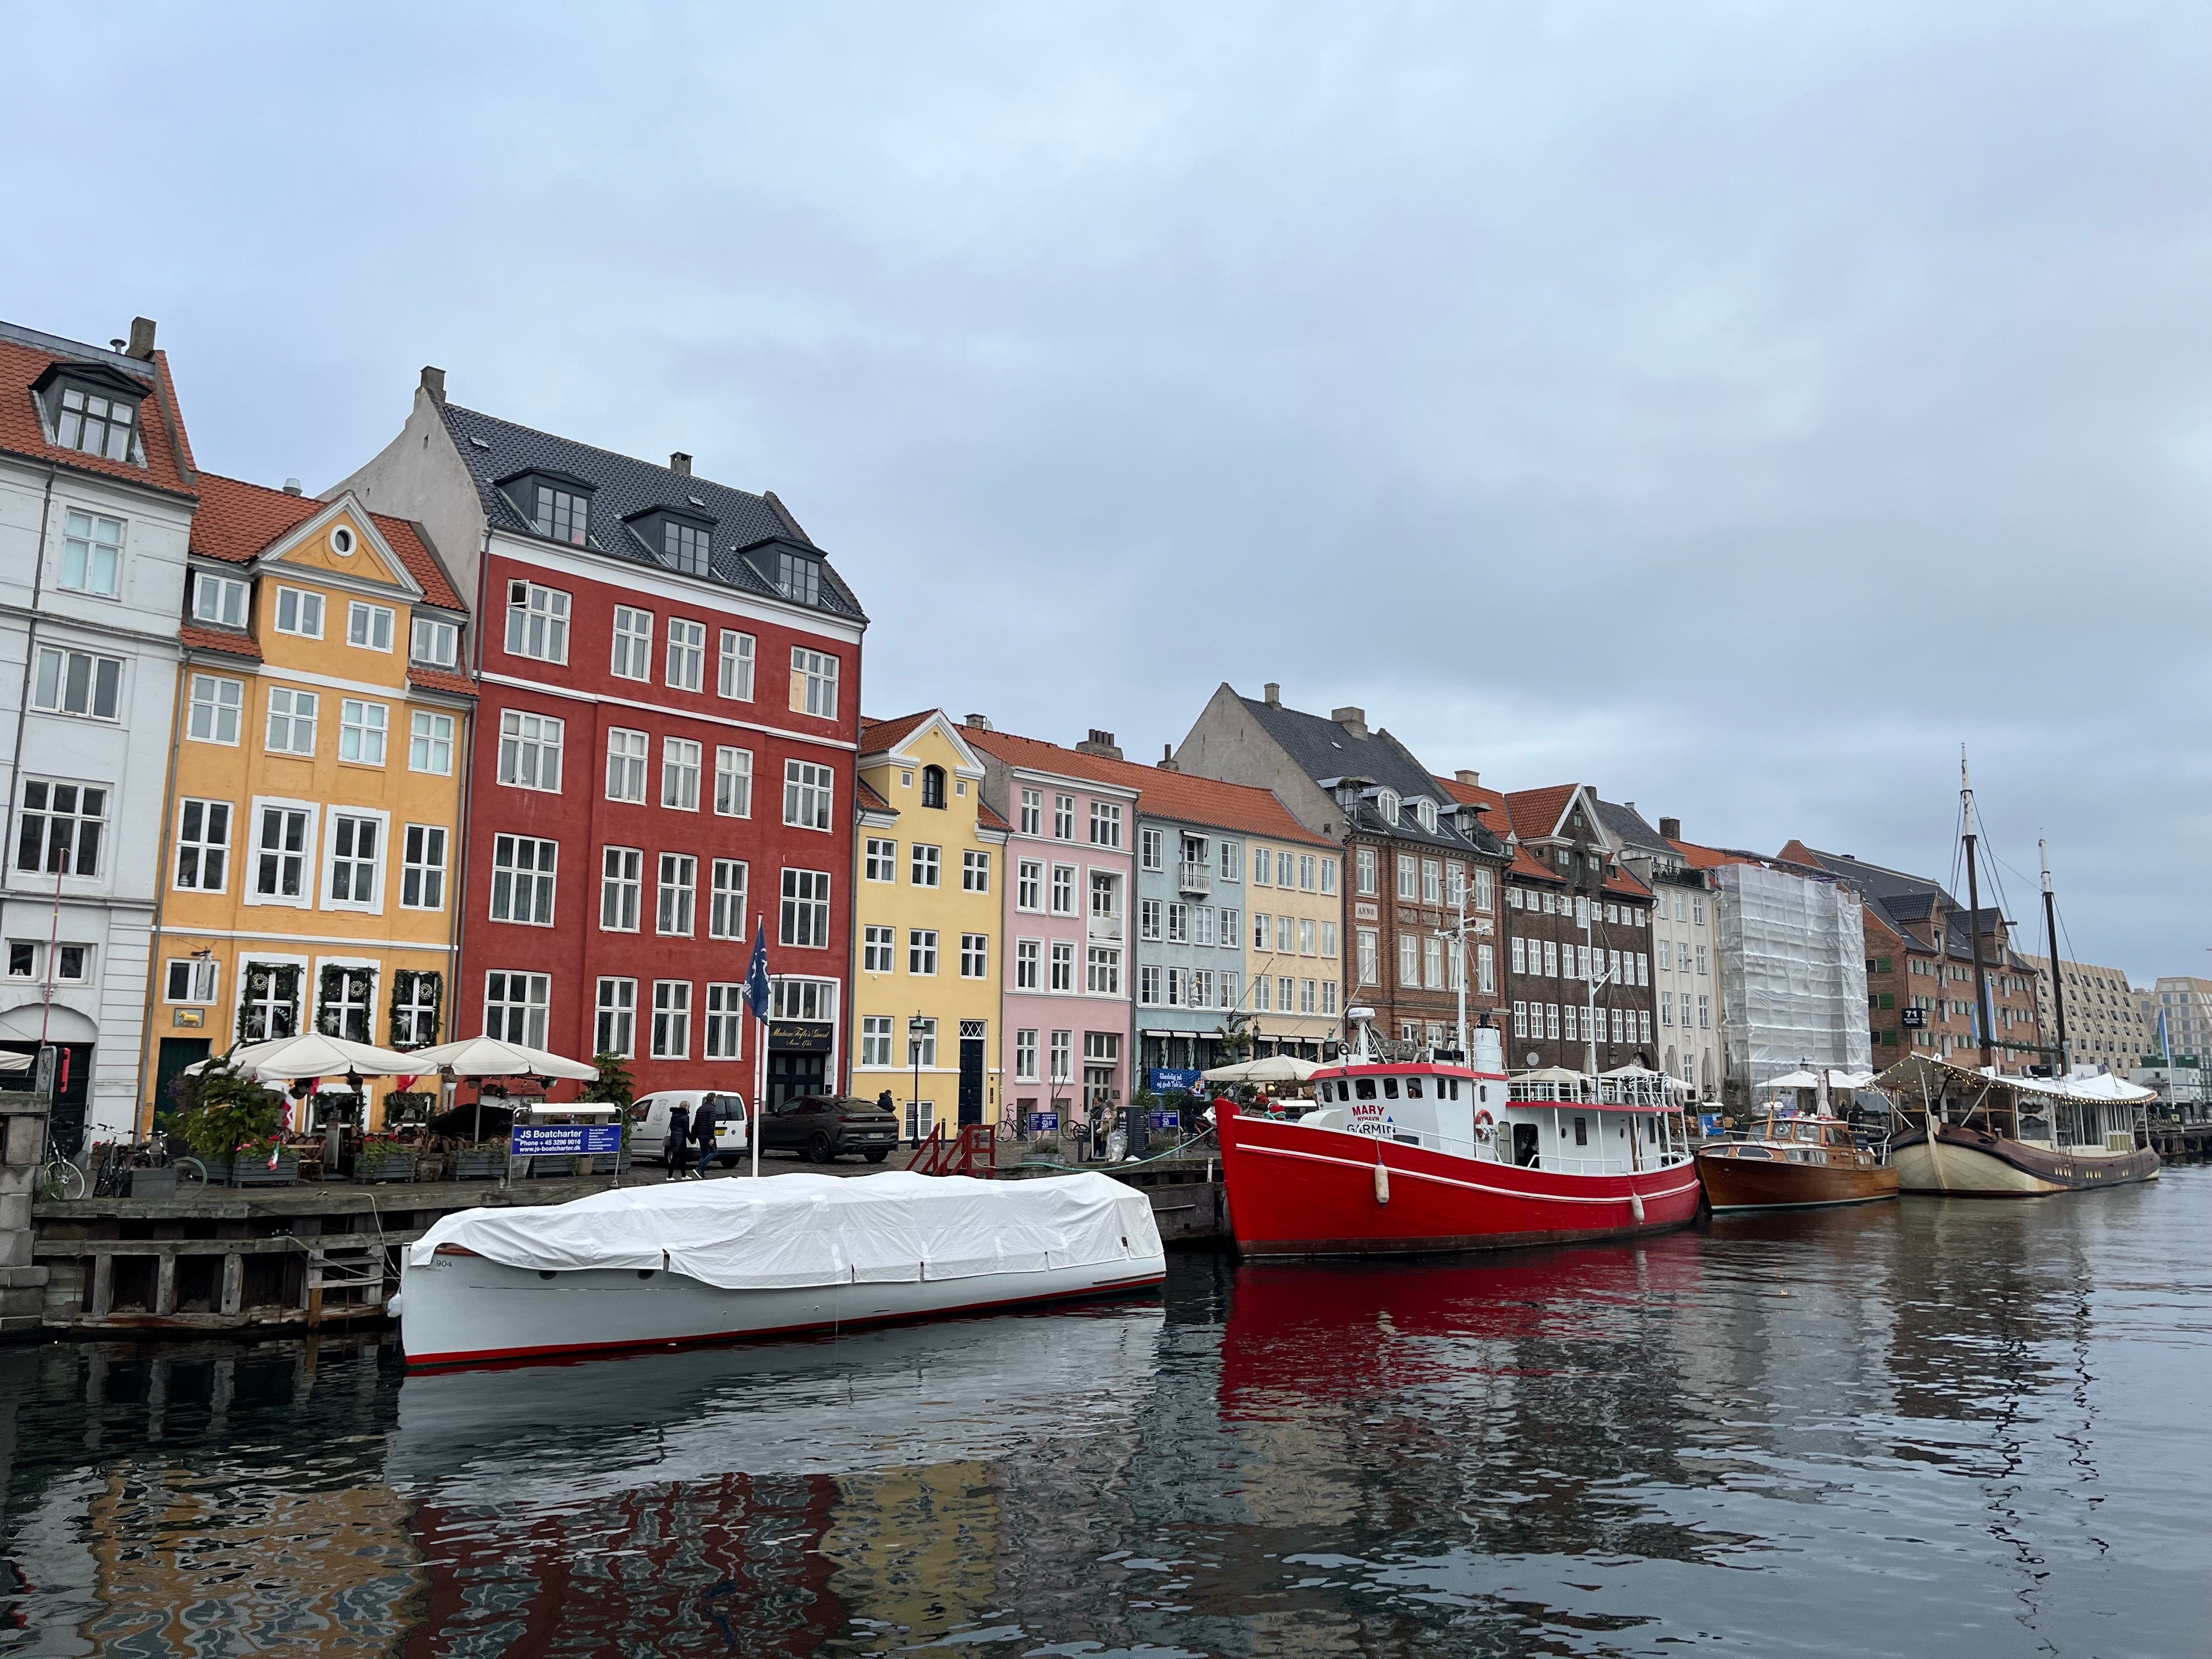 Typical Copenhagen photo with colourful building and a beautiful canal